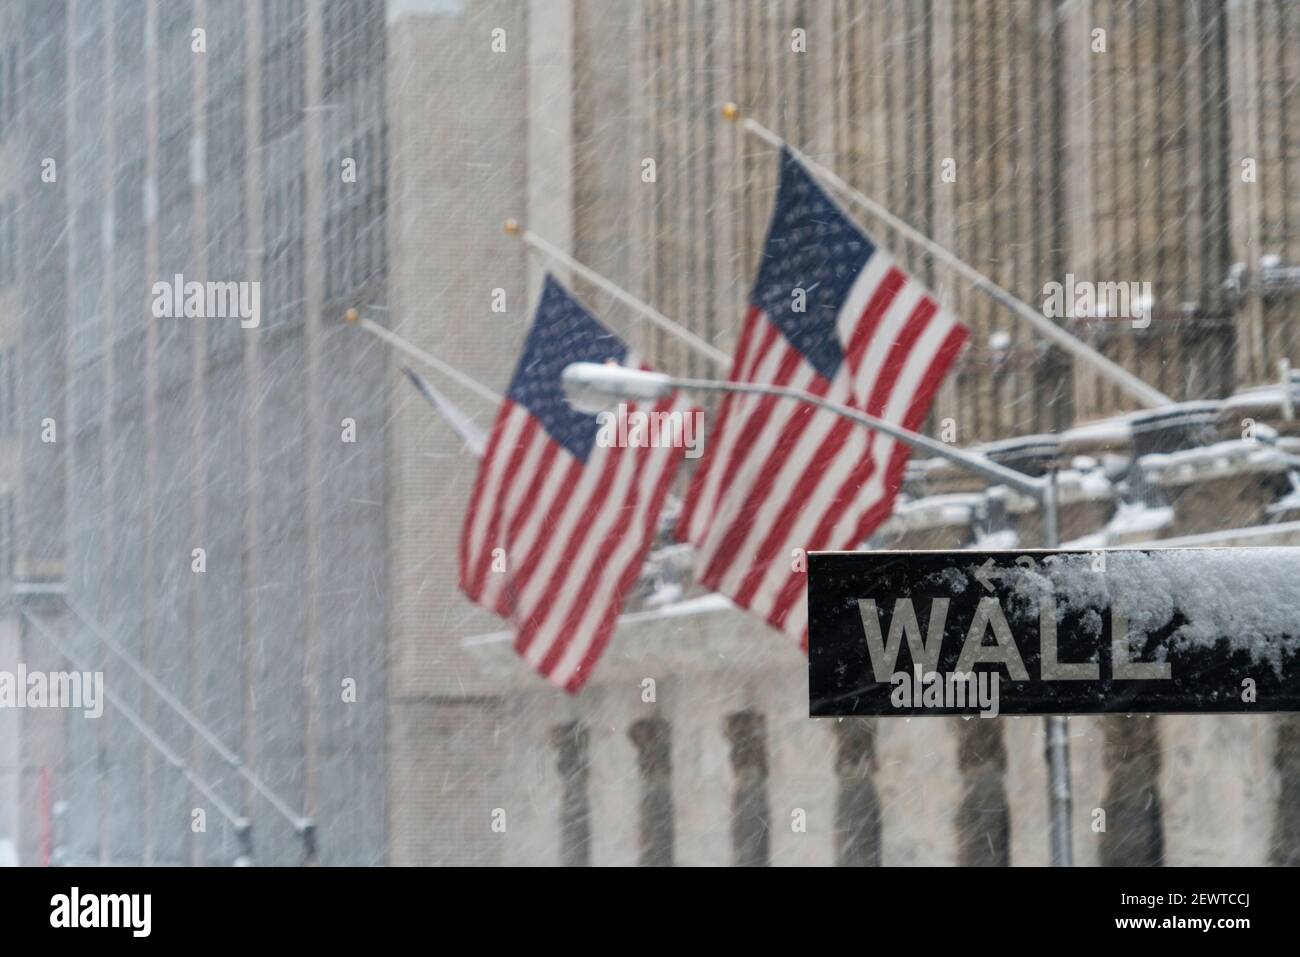 Wall Street road sign stands at front of New York Stock Exchange during the winter snowstorm at Lower Manhattan New York City NY USA. Stock Photo